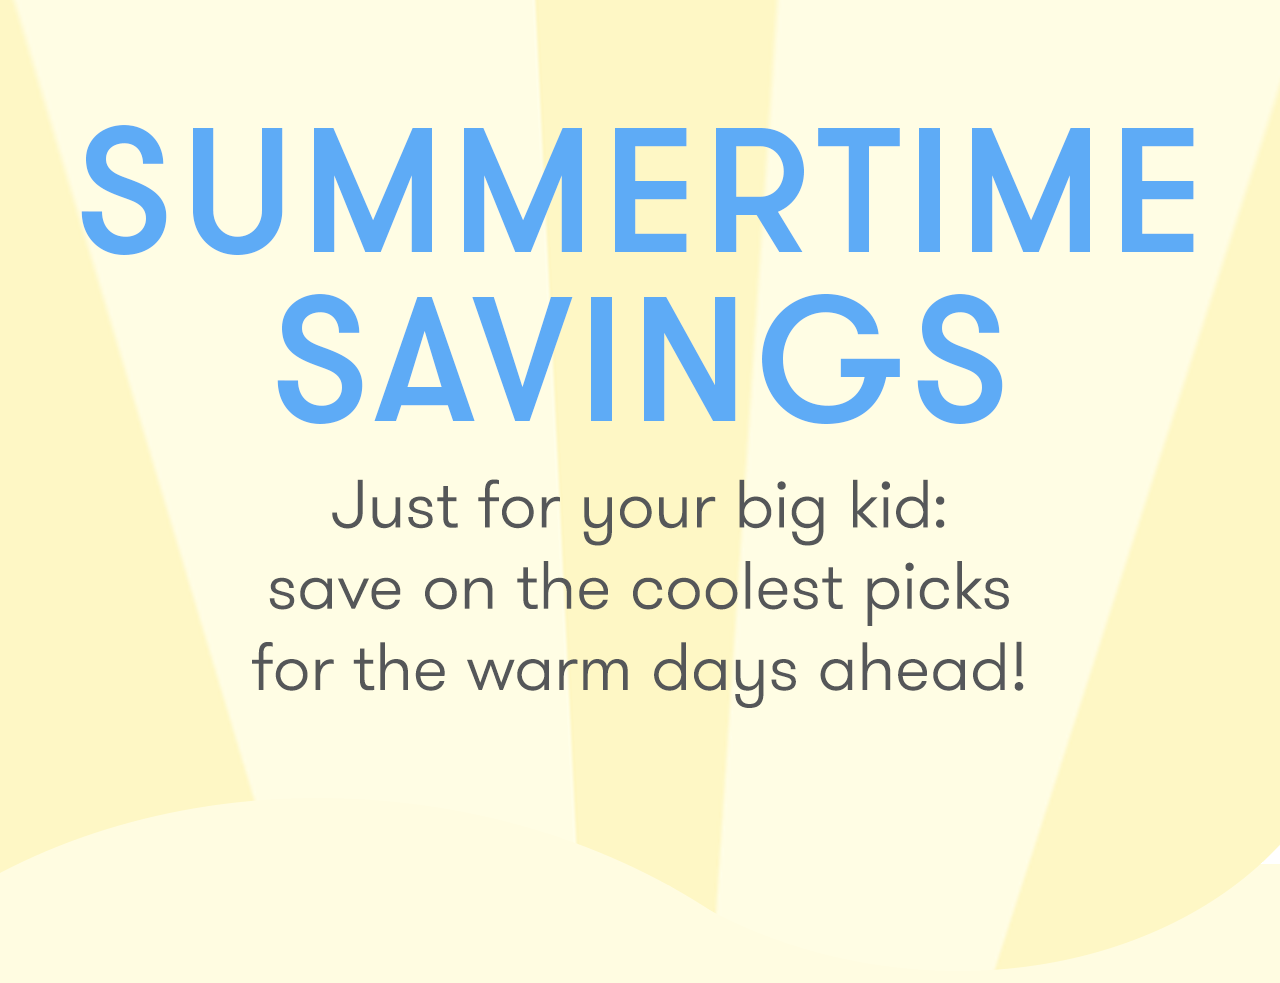 Summertime Savings just for your big kid!